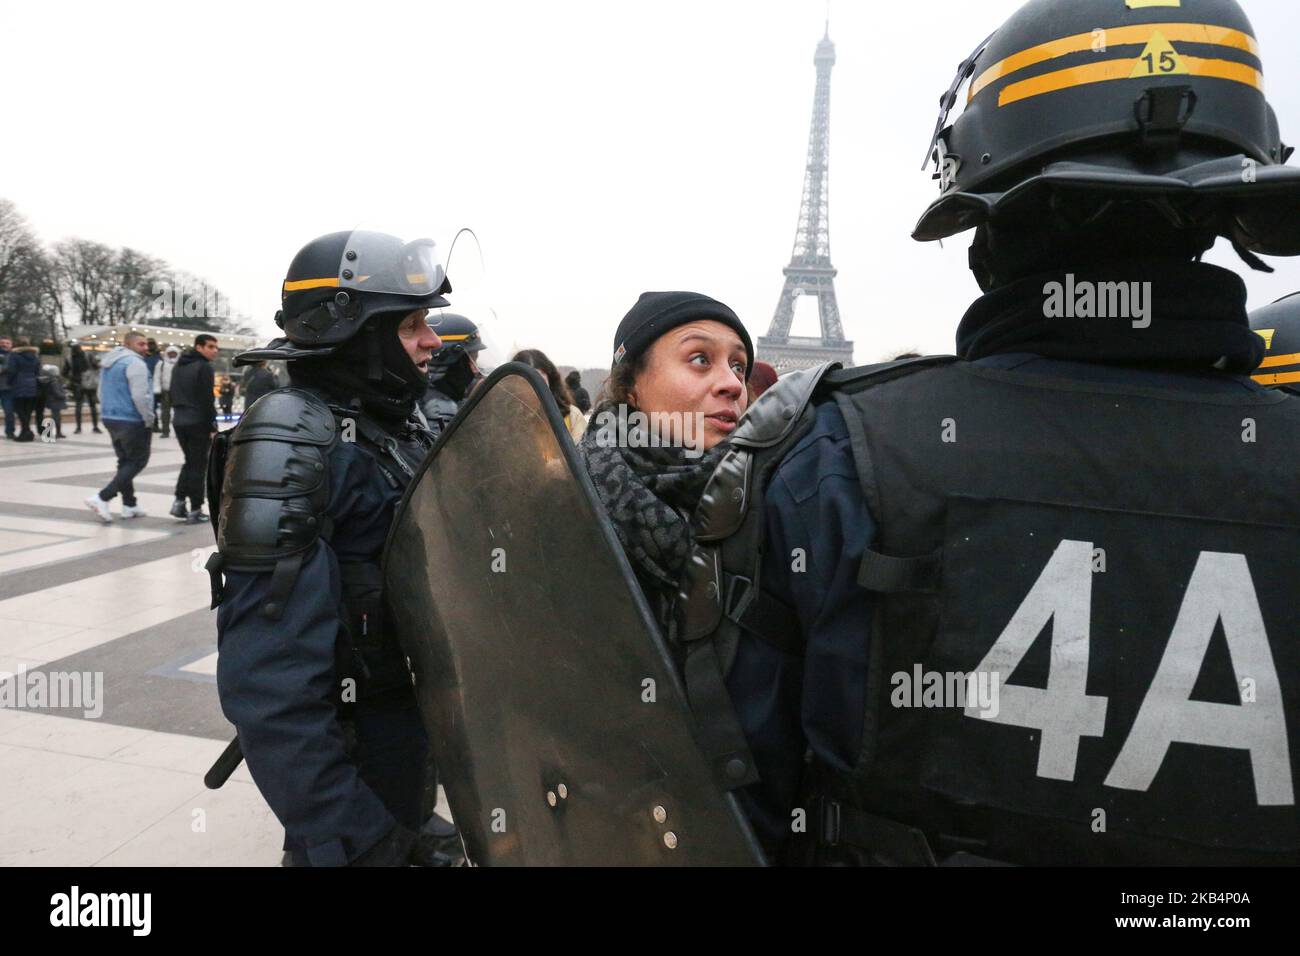 Members of the 'Witch Bloc' feminist group demonstrate behind riot police as they came to disturb the pro-life movement 13th 'March for Life' (Marche pour la vie) anti-abortion rally in Paris on January 20, 2019. Particpants in the march claim to have received the support of Pope Francis and several French bishops. Organizers urged doctors across the country to use their 'conscientious objection' and stop performing abortions. About 200,000 abortions are performed every year in France.Organizers were also marching against a recommendation in September by France's highest bioethics body that si Stock Photo